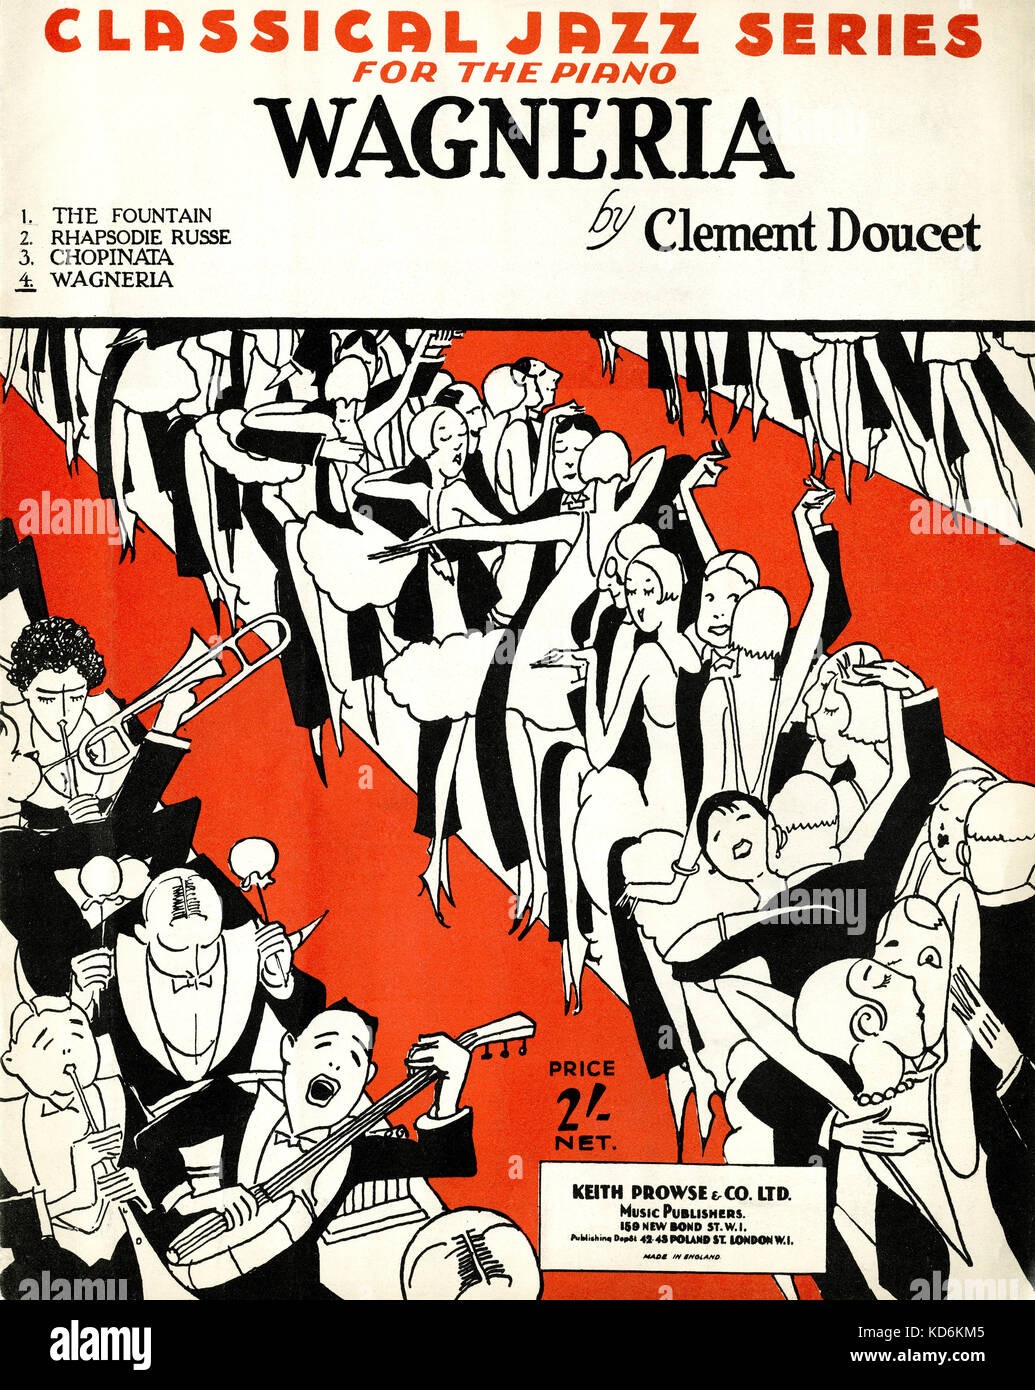 Wagneria  by Clément Doucet. Classical jazz series for the piano. Score cover. 1927.  Phantasy for piano on themes of Wagner. Illustration showing 1920's ball scene with people dancing and jazz band (ukulele, trumpet, trombone, drums). Published by Keith Prowse & Co., London, under licence of Éditions Musicales Sam Fox, Paris, 1927. Stock Photo